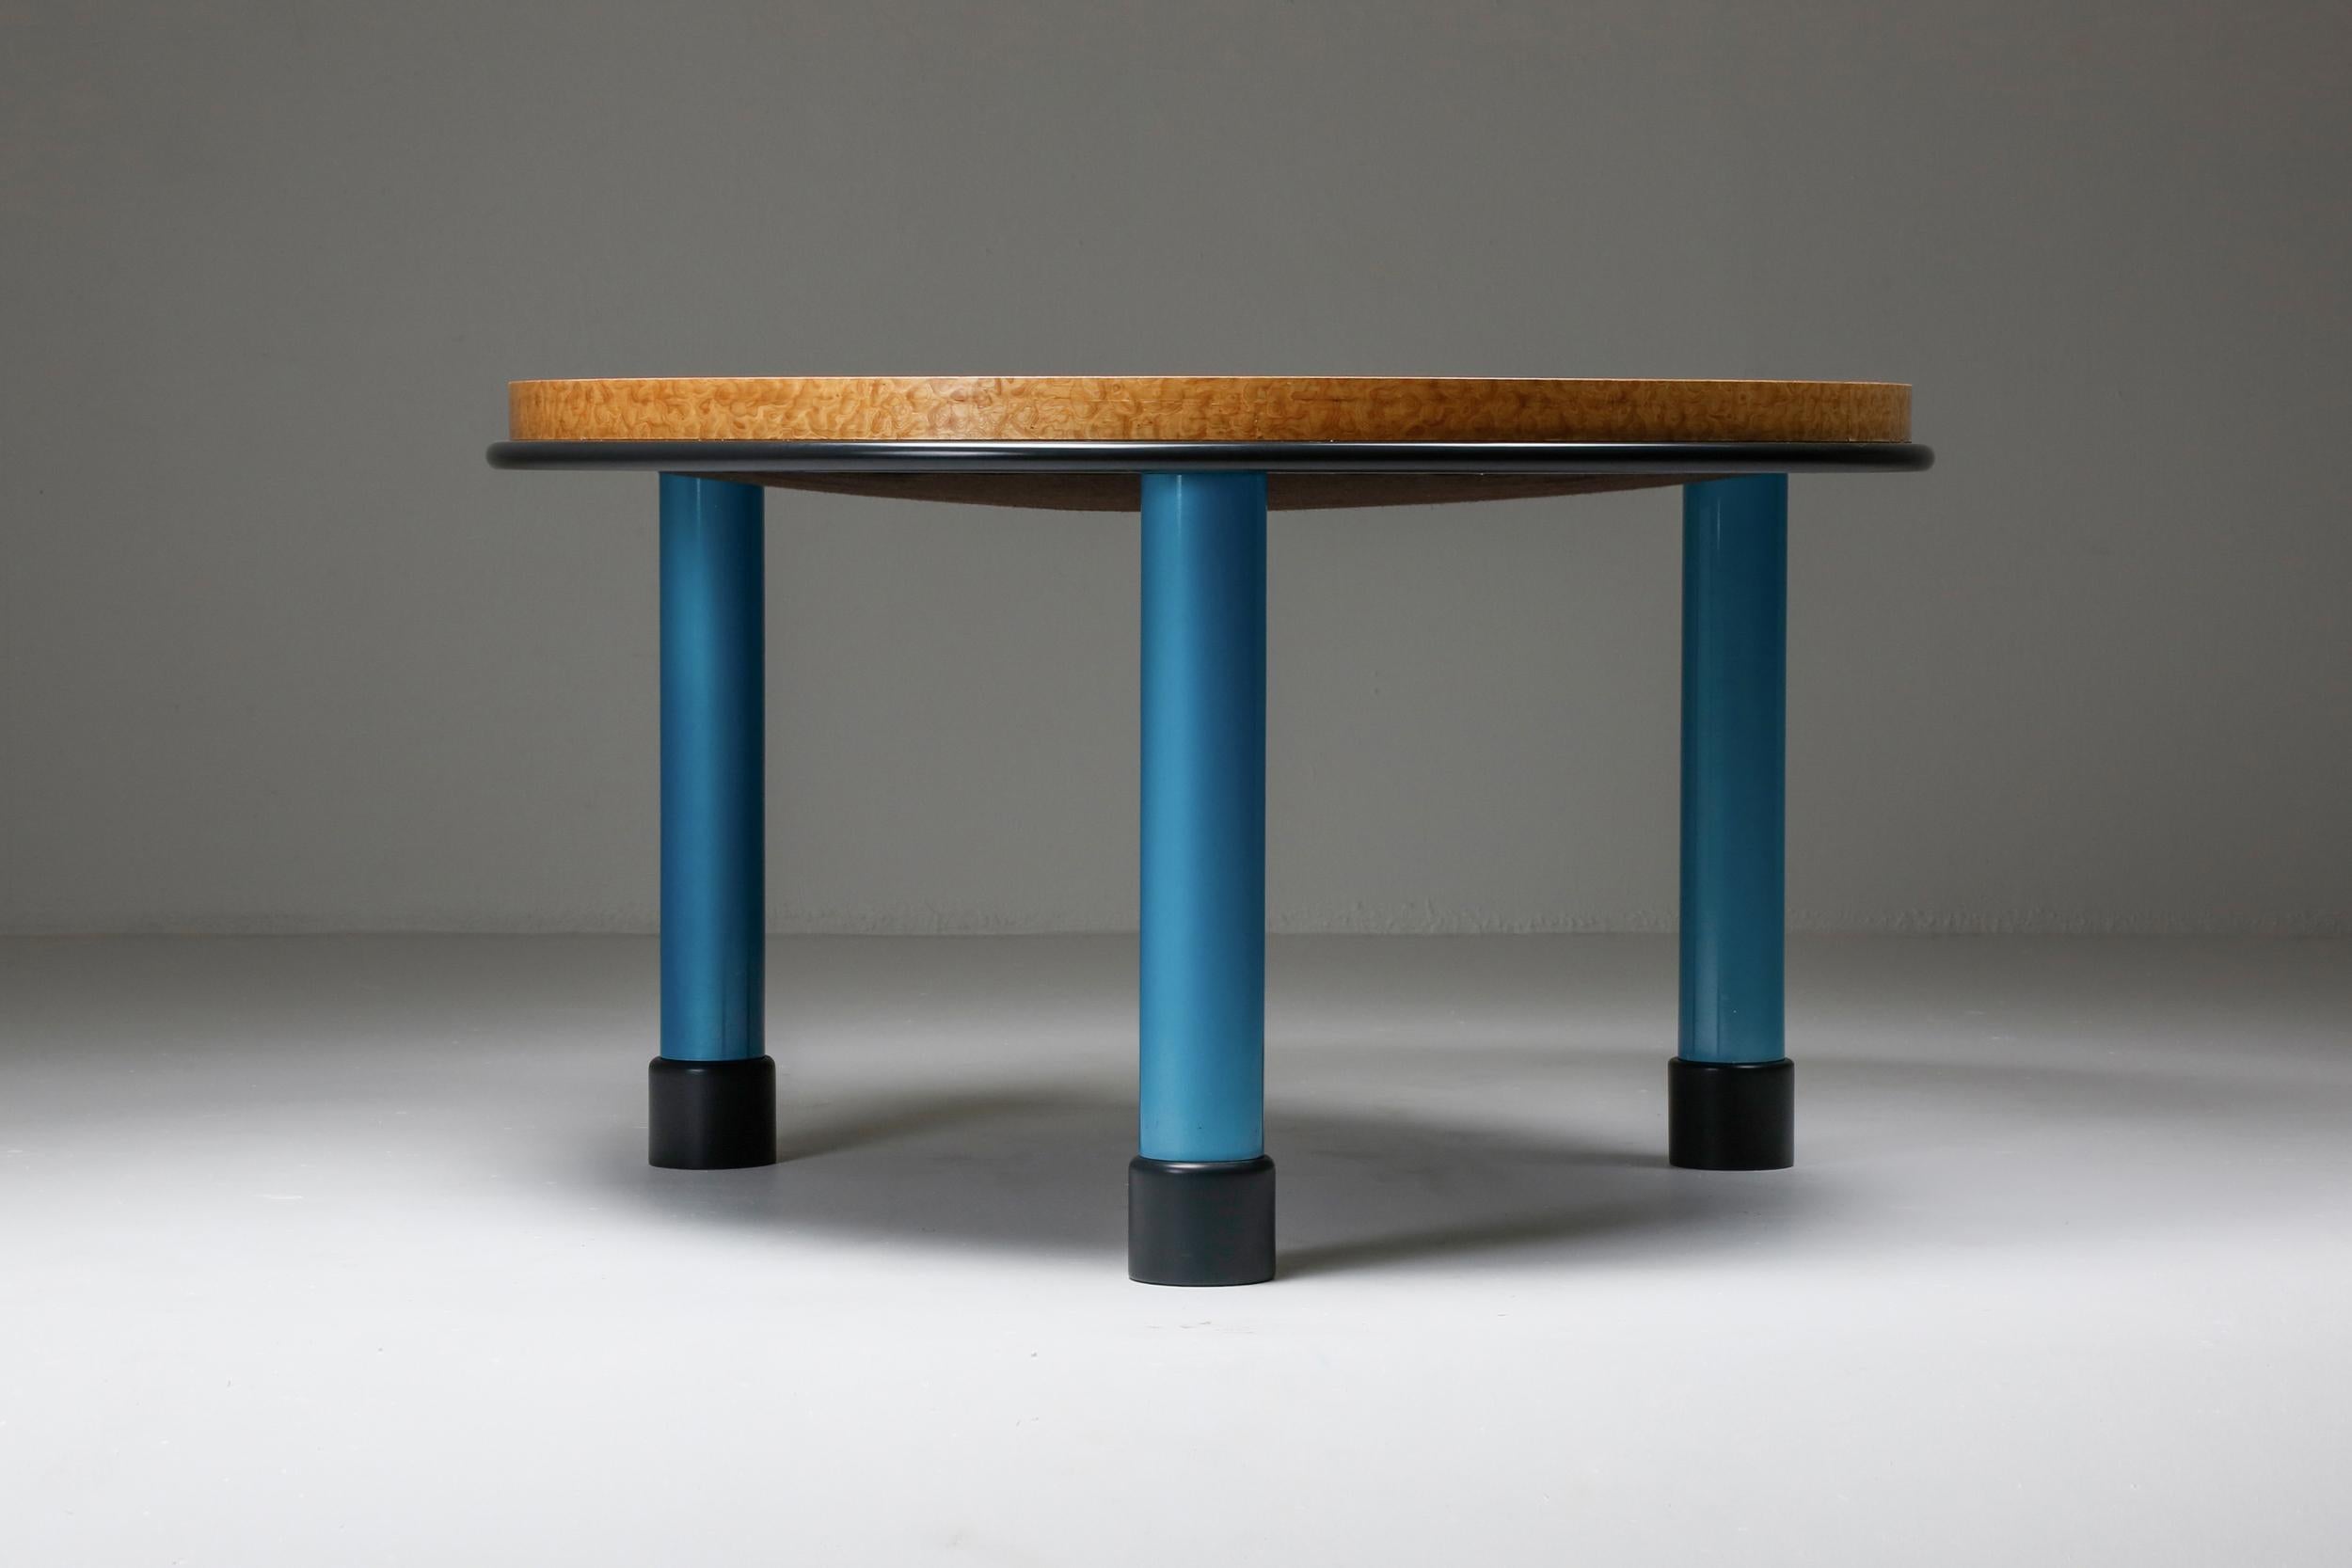 Ettore Sottsass; table; side table; Italian design; Memphis design; 
Table with burl wood top and blue lacquer leggs. 

Ettore Sottsass (14 September 1917 – 31 December 2007) was an Italian architect and designer during the 20th century. His body of